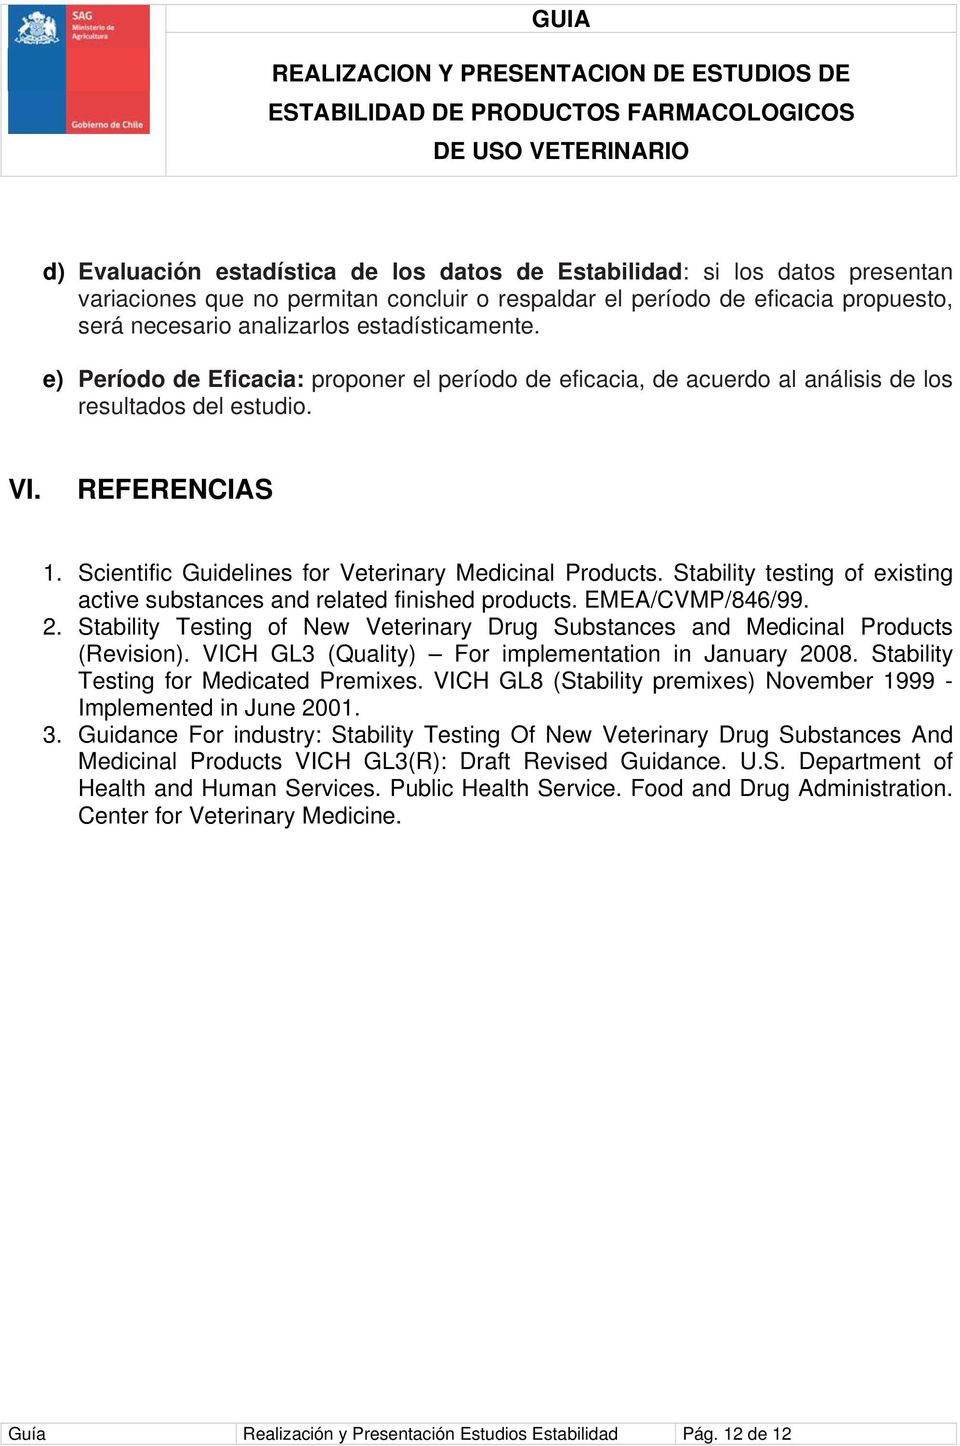 Scientific Guidelines for Veterinary Medicinal Products. Stability testing of existing active substances and related finished products. EMEA/CVMP/846/99. 2.